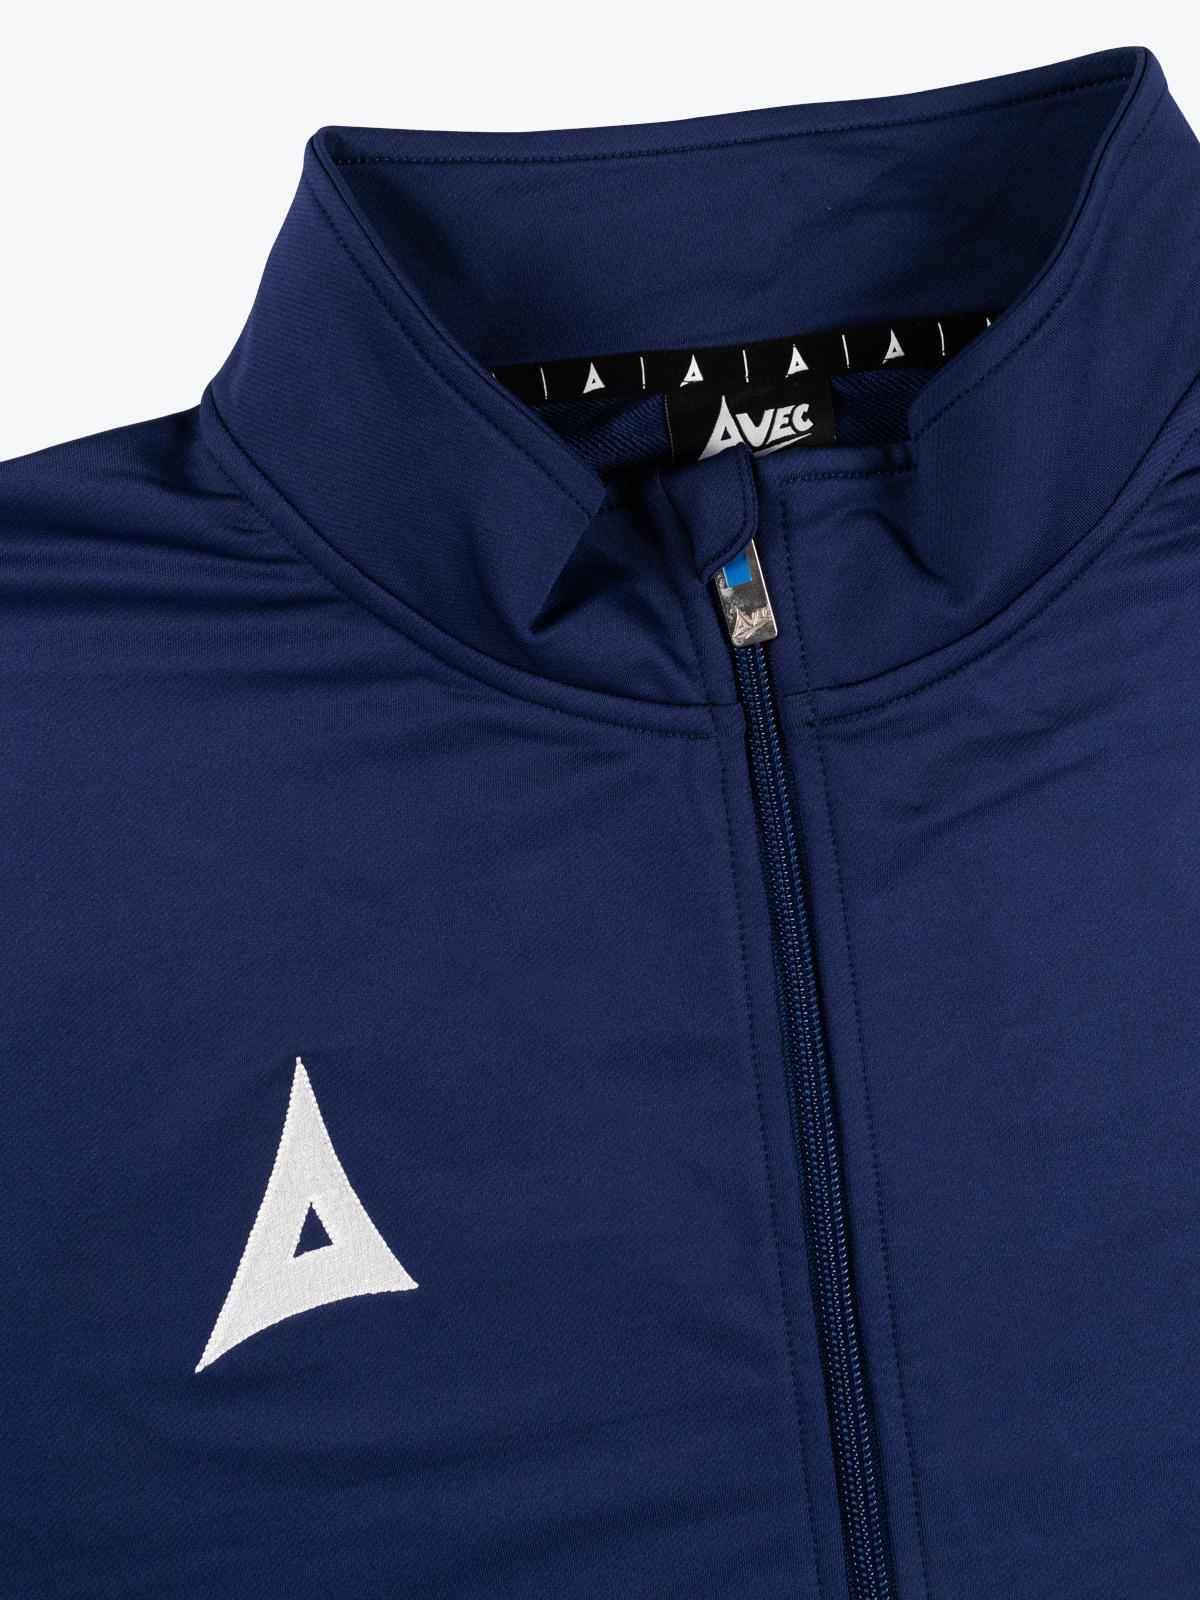 picture of focus 2 track jacket - navy